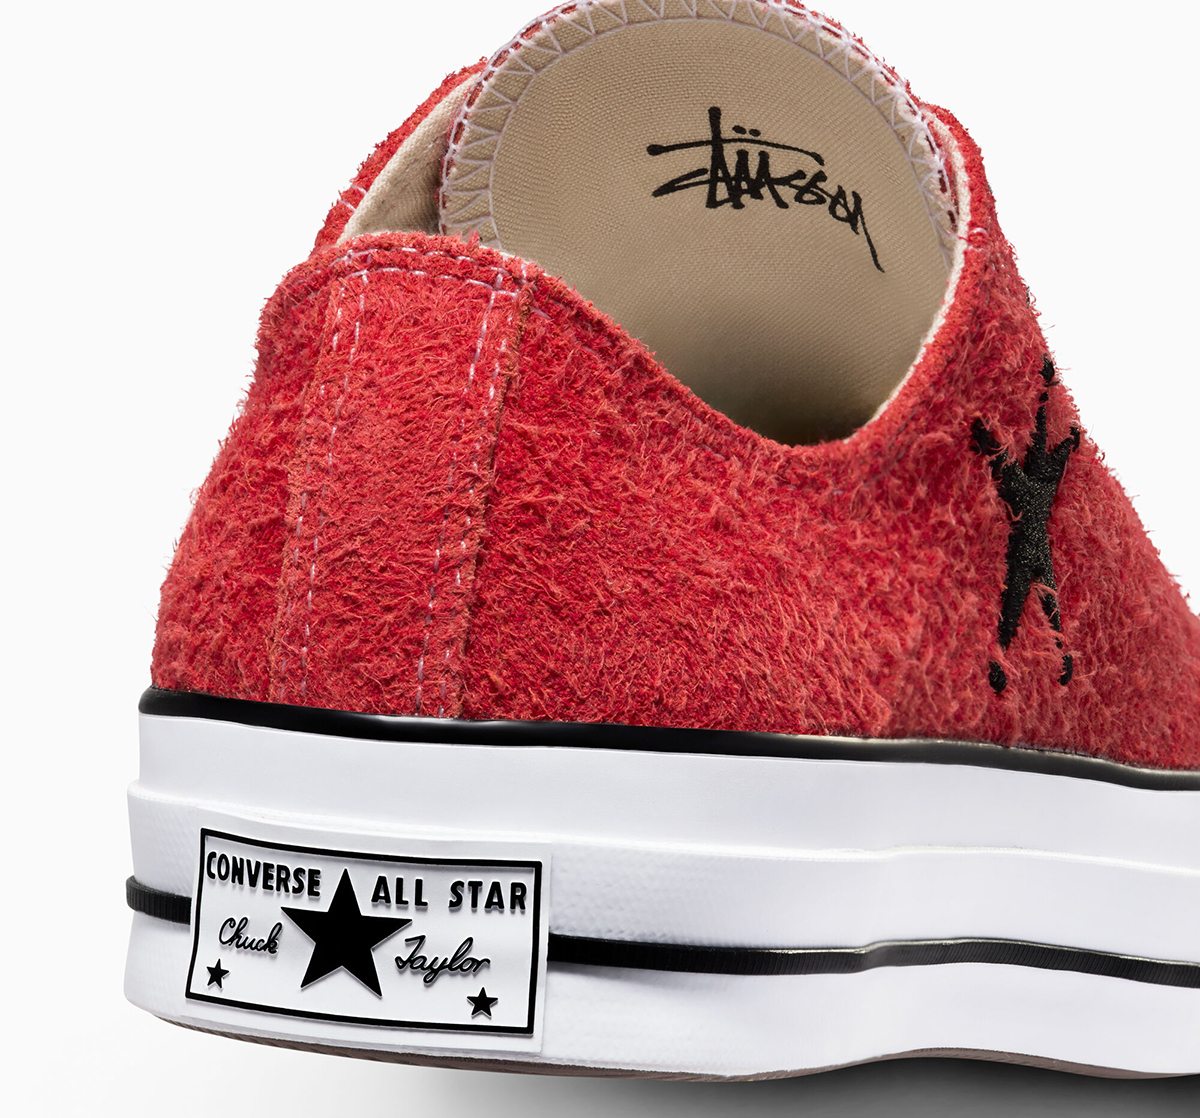 Stussy Converse Chuck Taylor All Star Canvas Shoes Leisure Wear-resistant Non-Slip High Tops 155457C Poppy Red A07664c 3